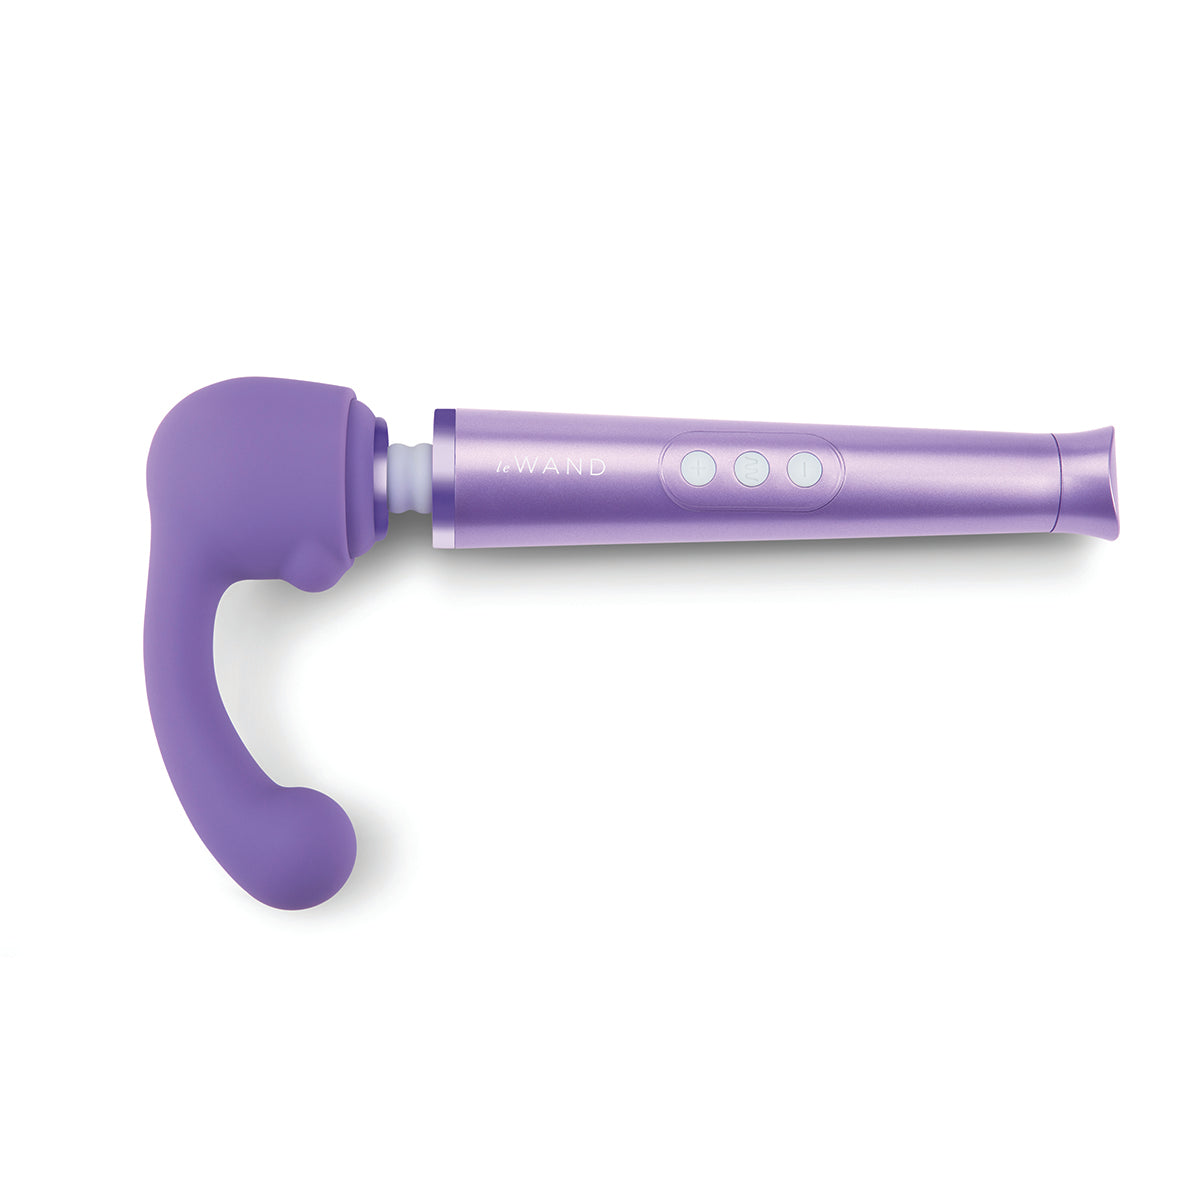 Le Wand Petite Curve Weighted Wand Attachment